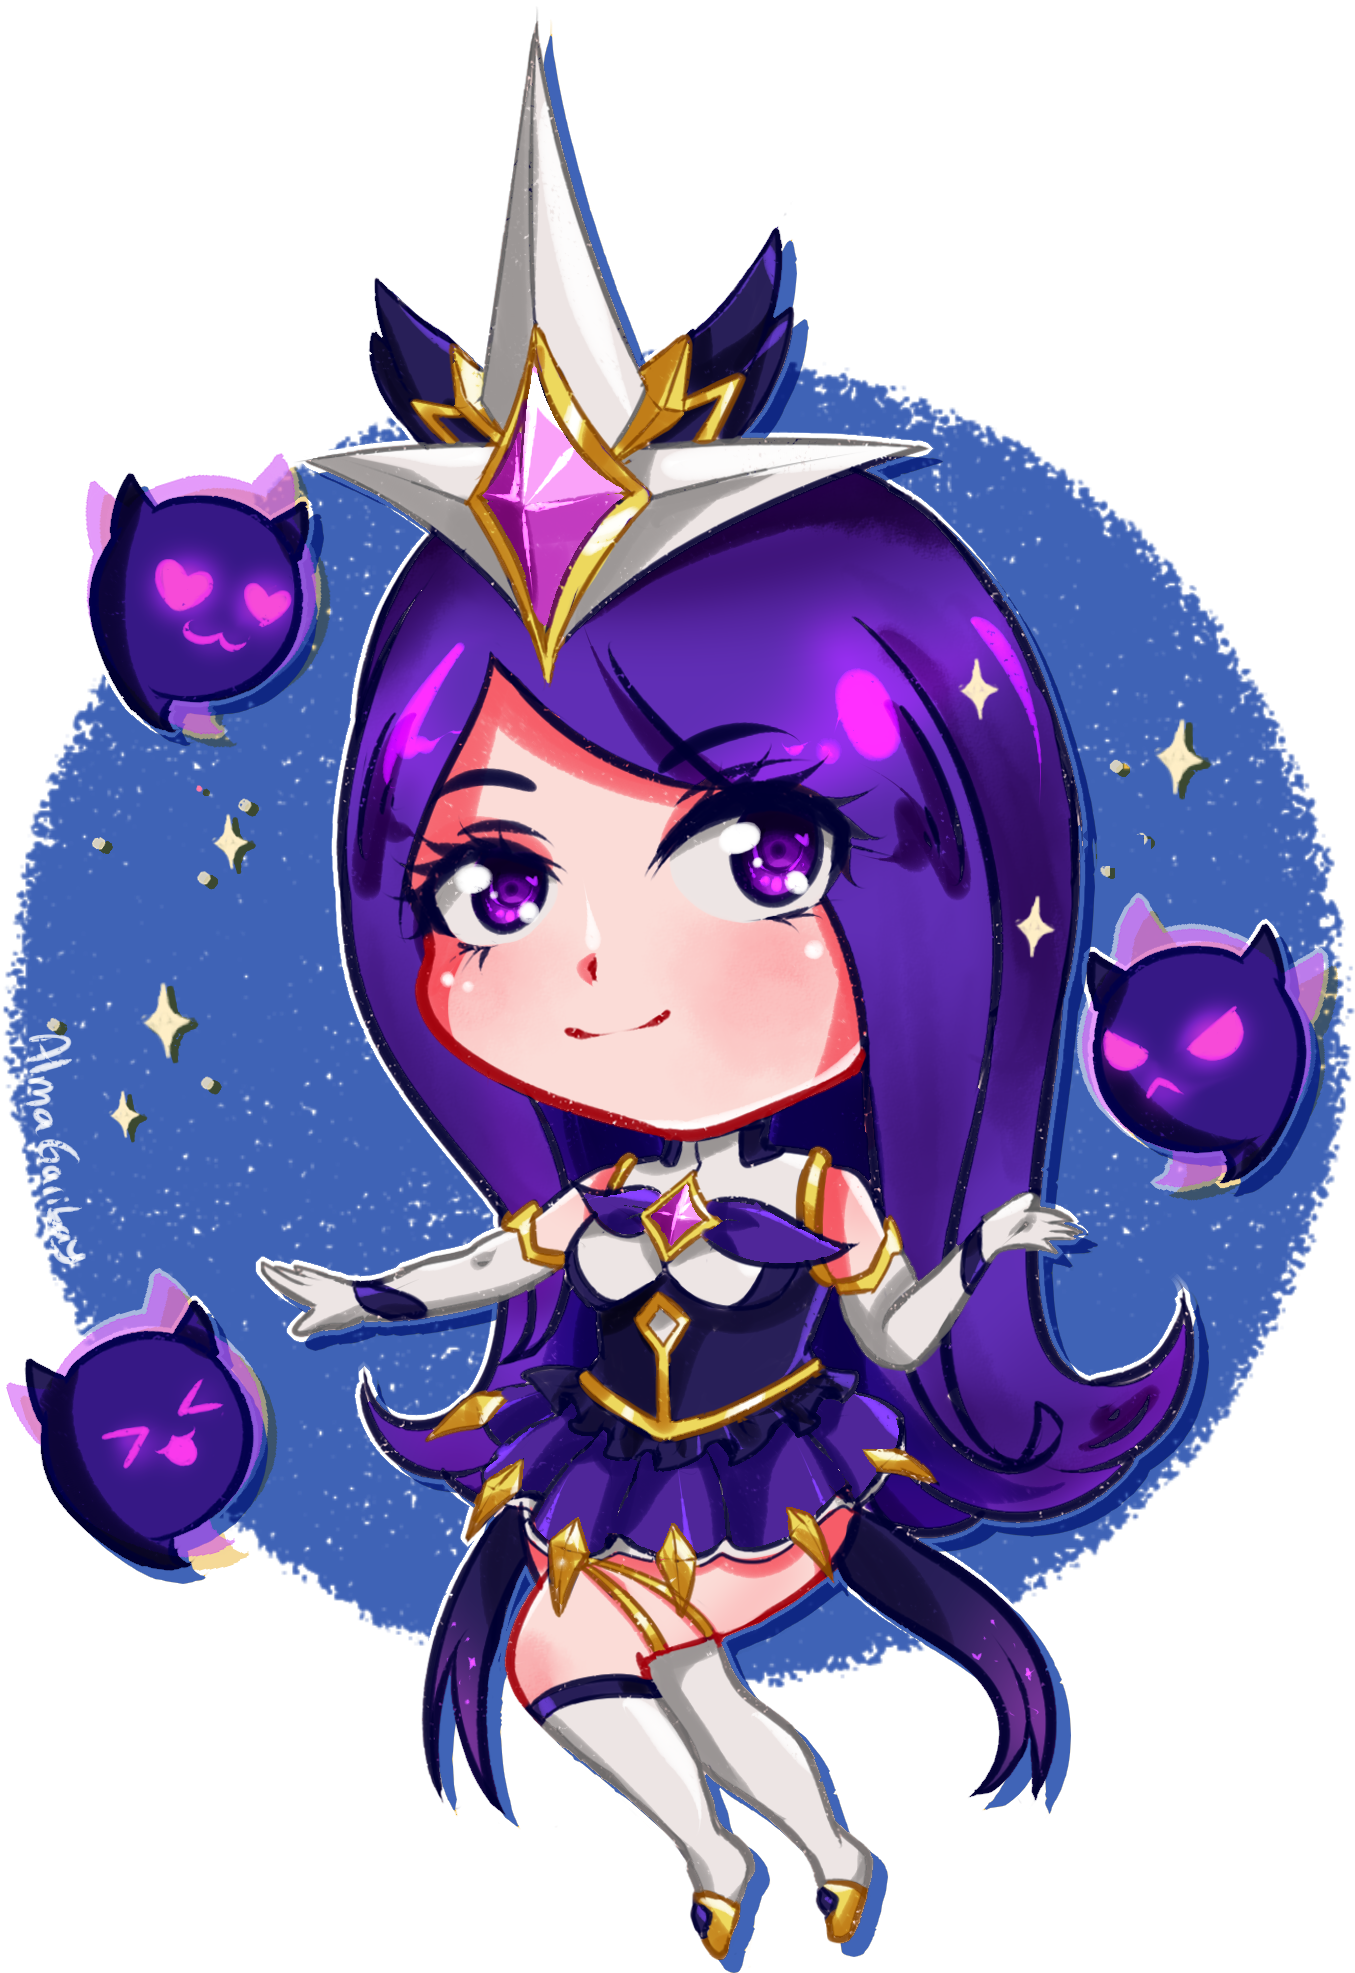 Chibi Star Guardian Syndra By Almagkrueger Hd Wallpaper - Portable Network Graphics , HD Wallpaper & Backgrounds